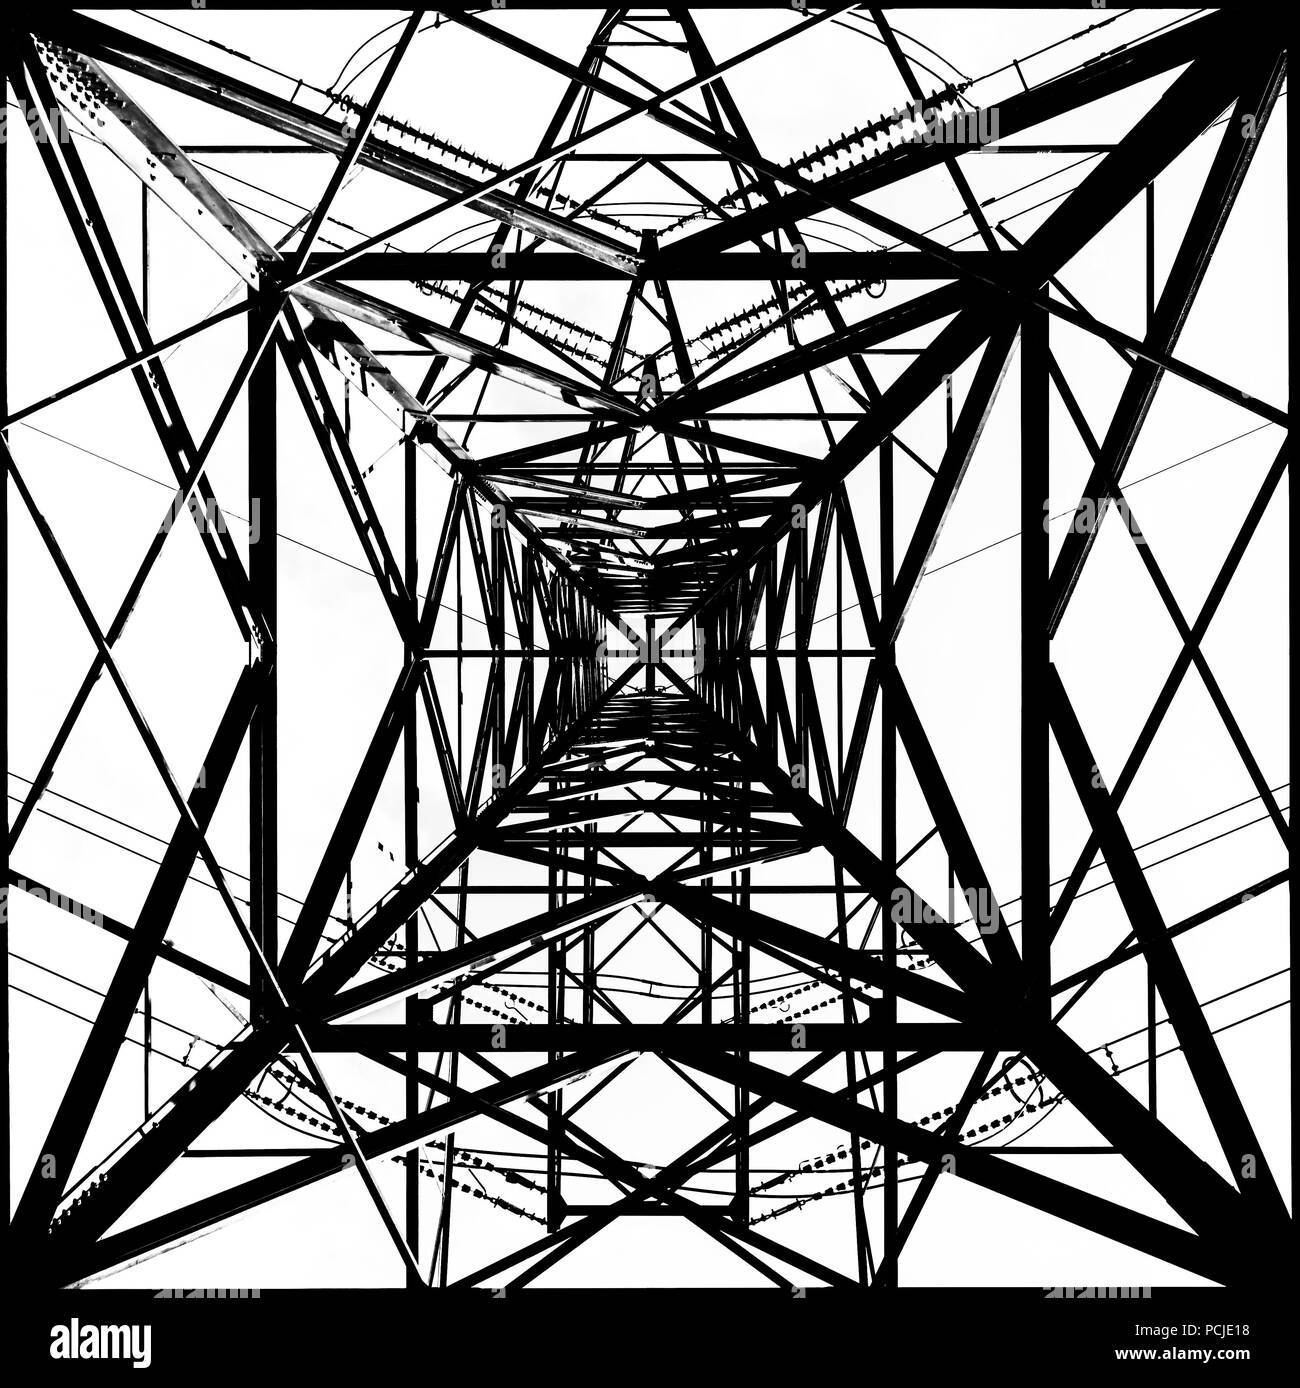 Symmetrical black and white view from underneath a pylon showing multiple squares and rectangles in a tessellating pattern Stock Photo